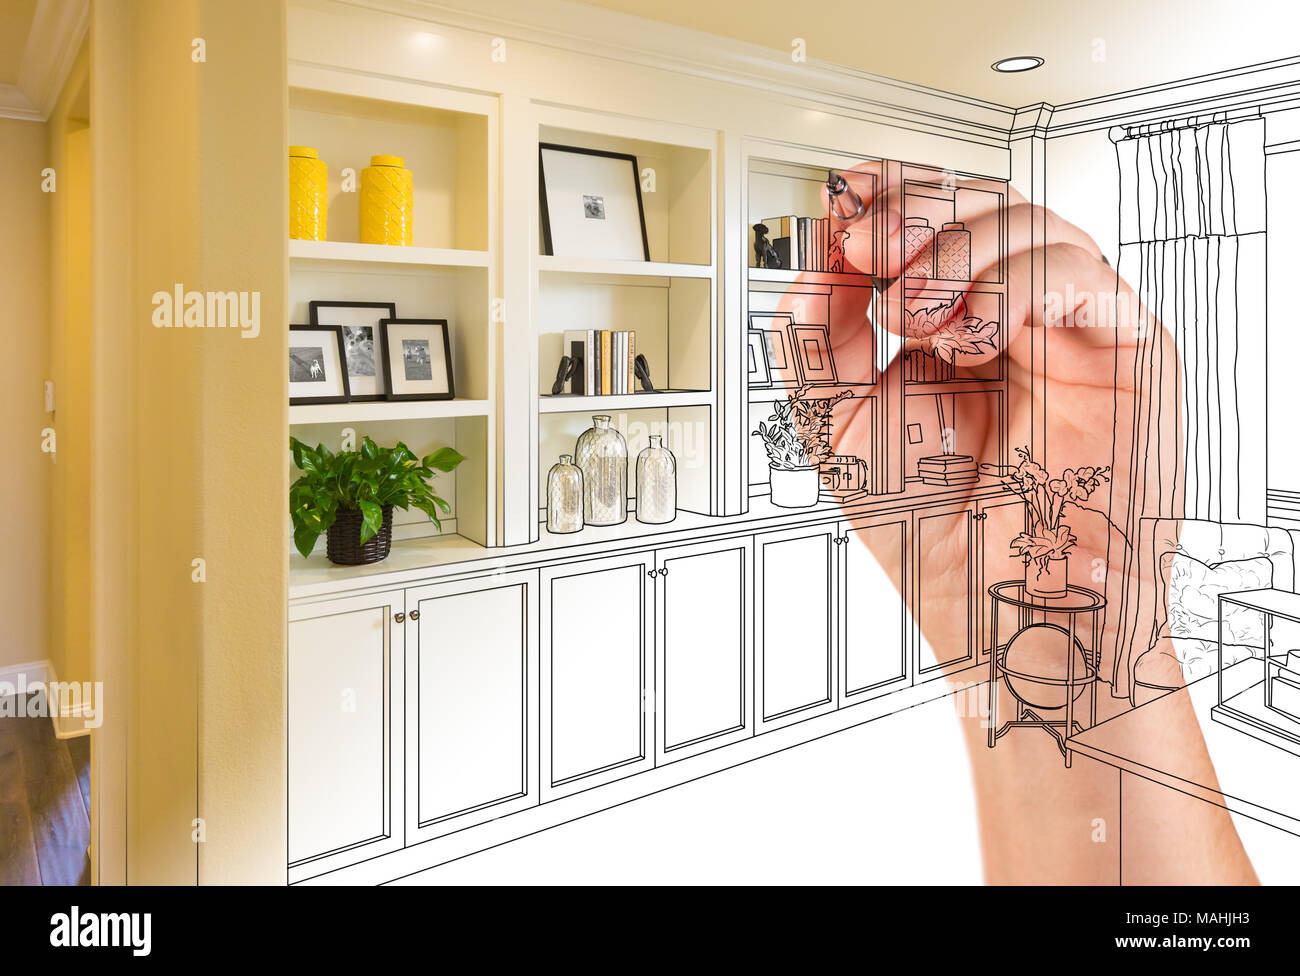 Hand Drawing Home Built-in Shelves and Cabinets with Photo Cross Section Showing. Stock Photo